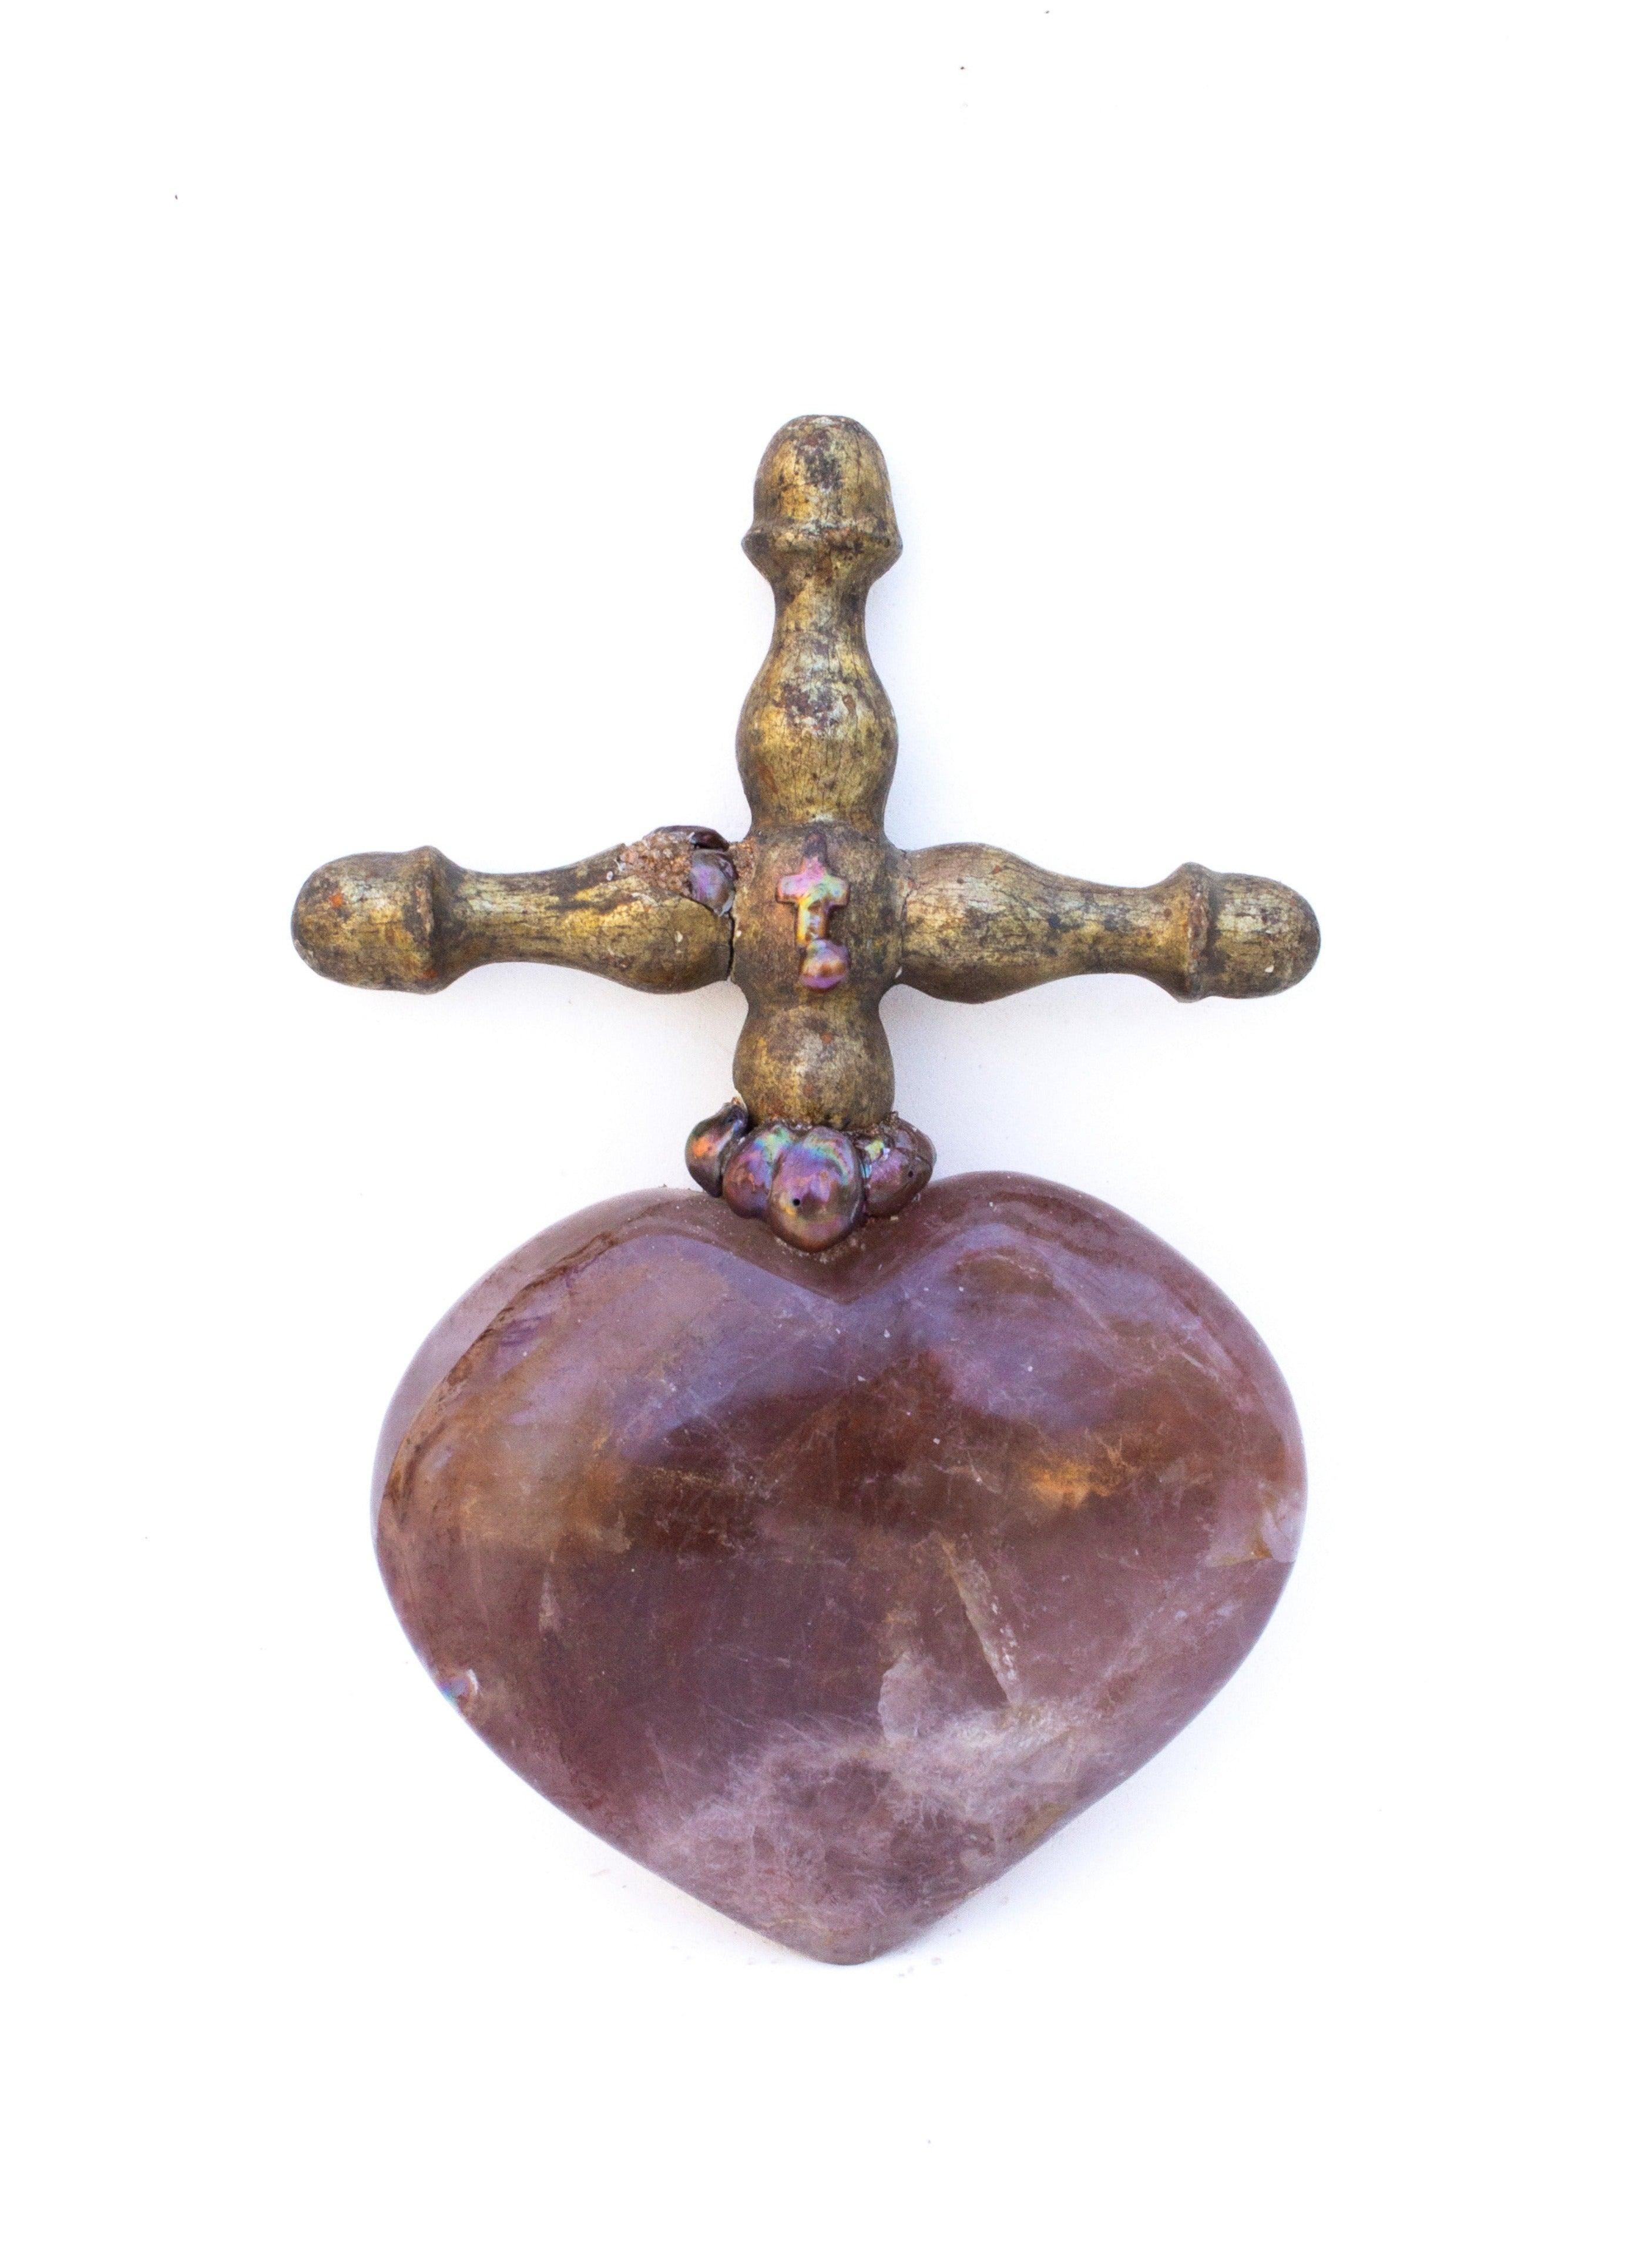 Sculptural 'Sacred Heart' - 18th century Italian cross mounted on a polished red hematoid quartz heart and adorned with natural-forming baroque pearls and a cross-shaped baroque pearl. The piece is inspired by 